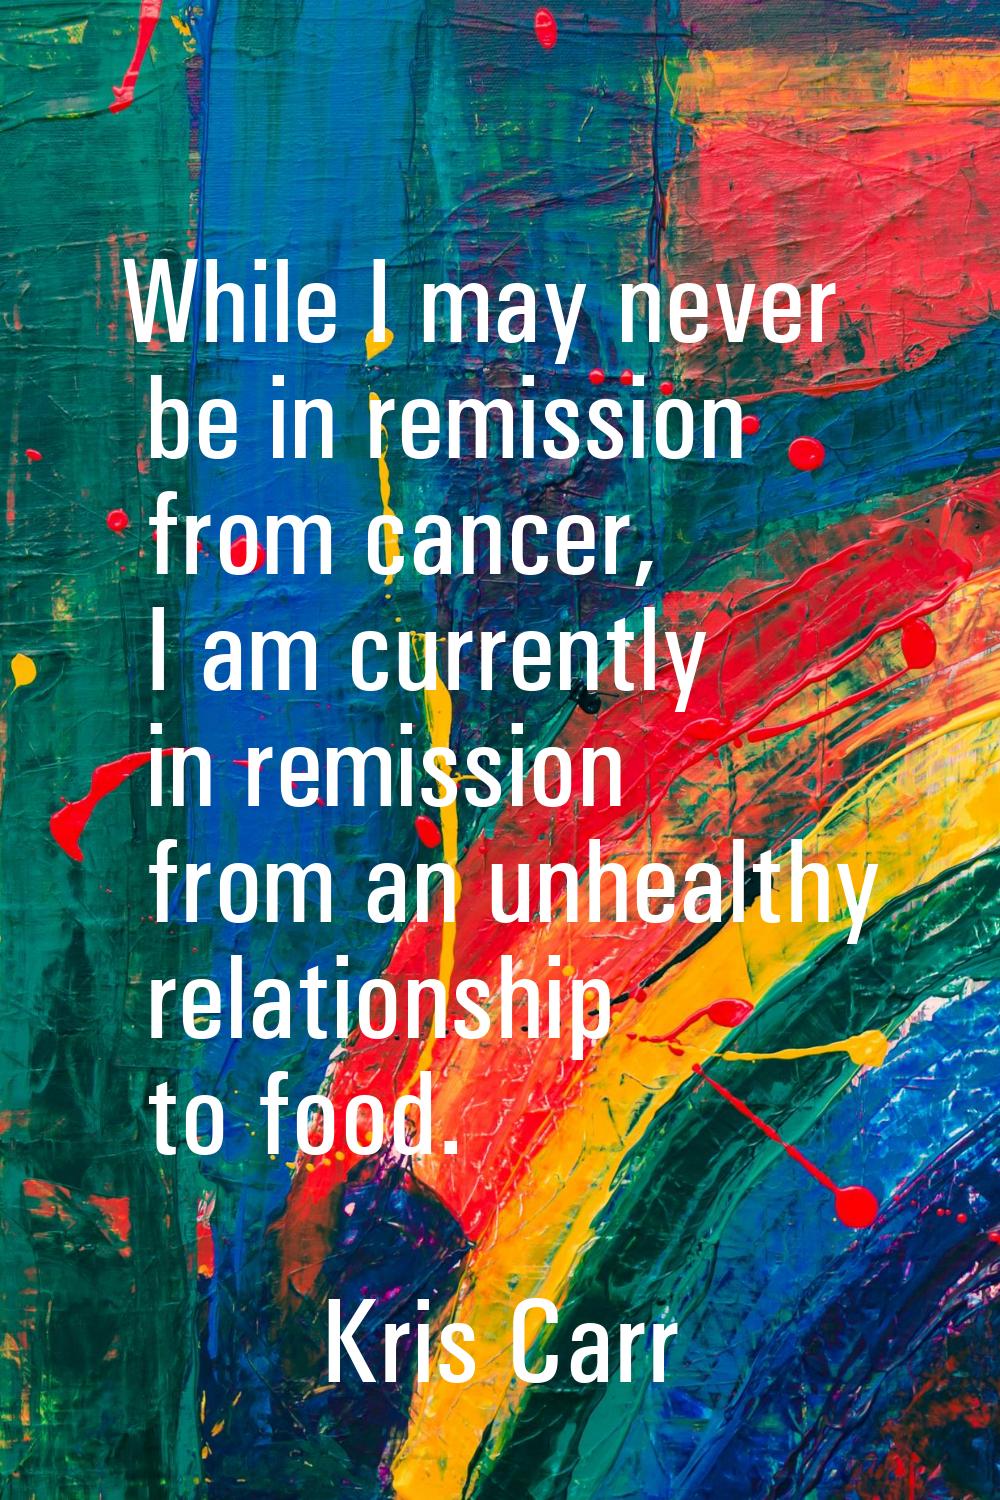 While I may never be in remission from cancer, I am currently in remission from an unhealthy relati